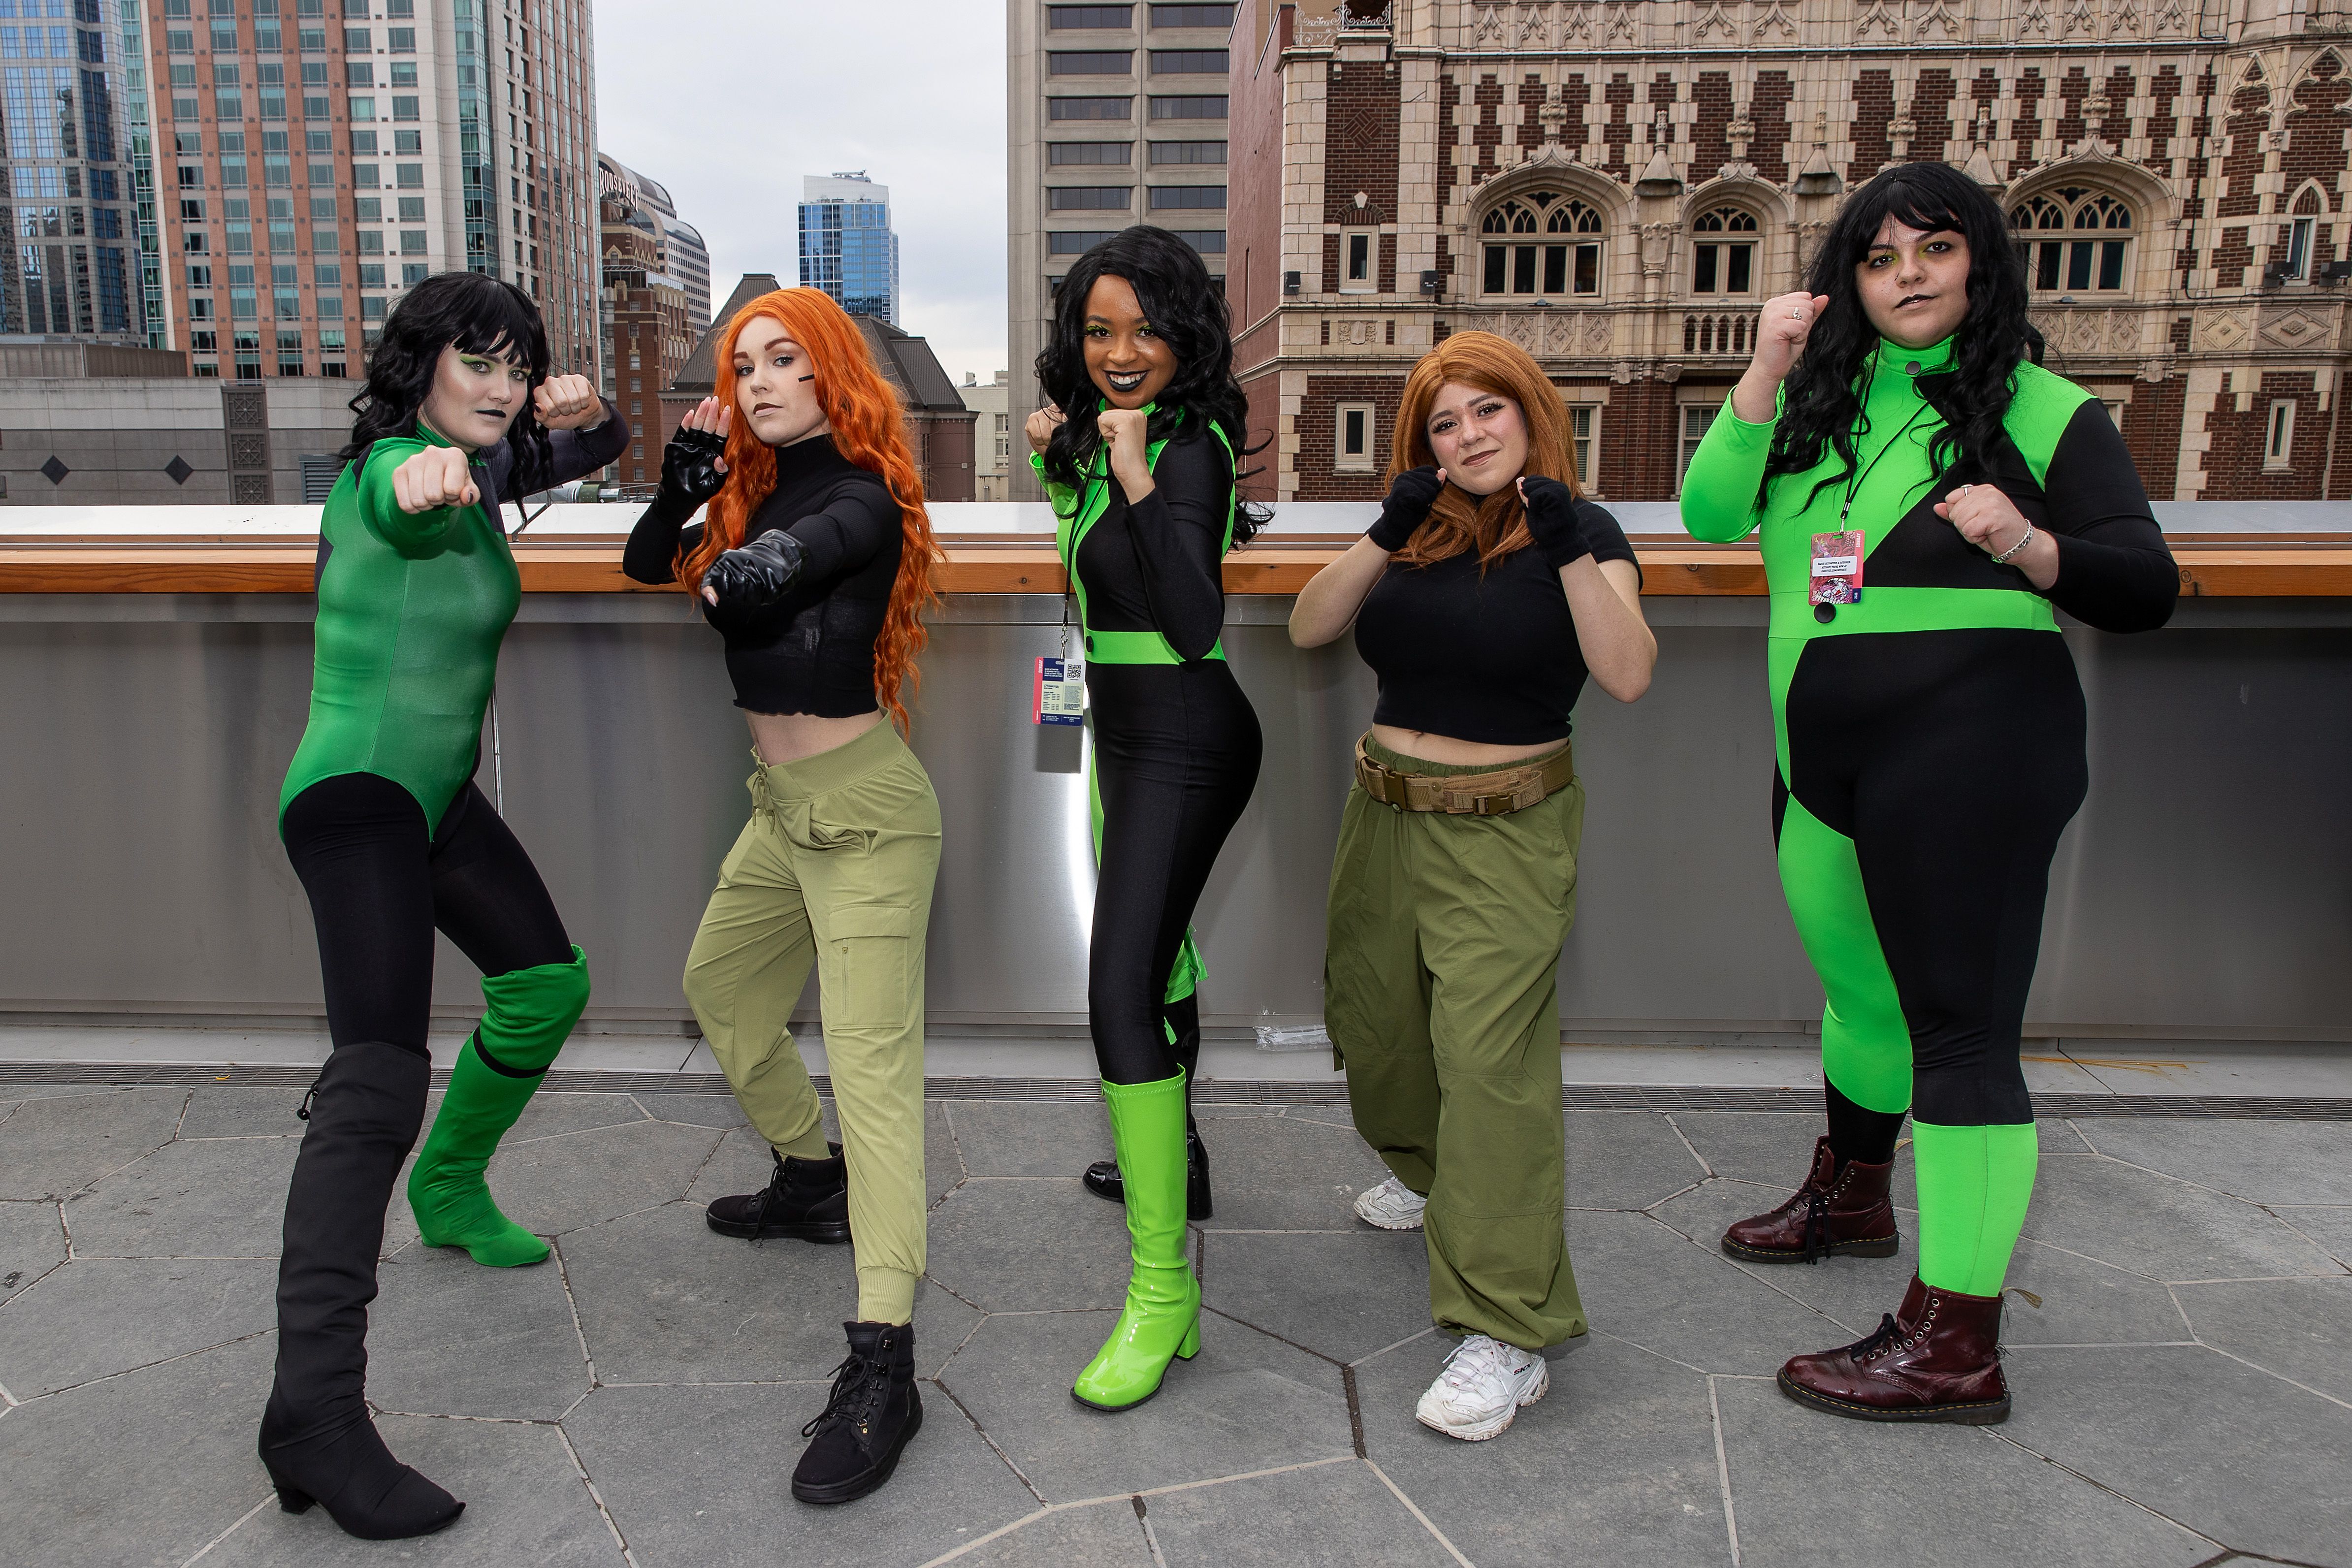 Five women in black and green cosplay gear stand on a rooftop with their arms up in fighting poses.